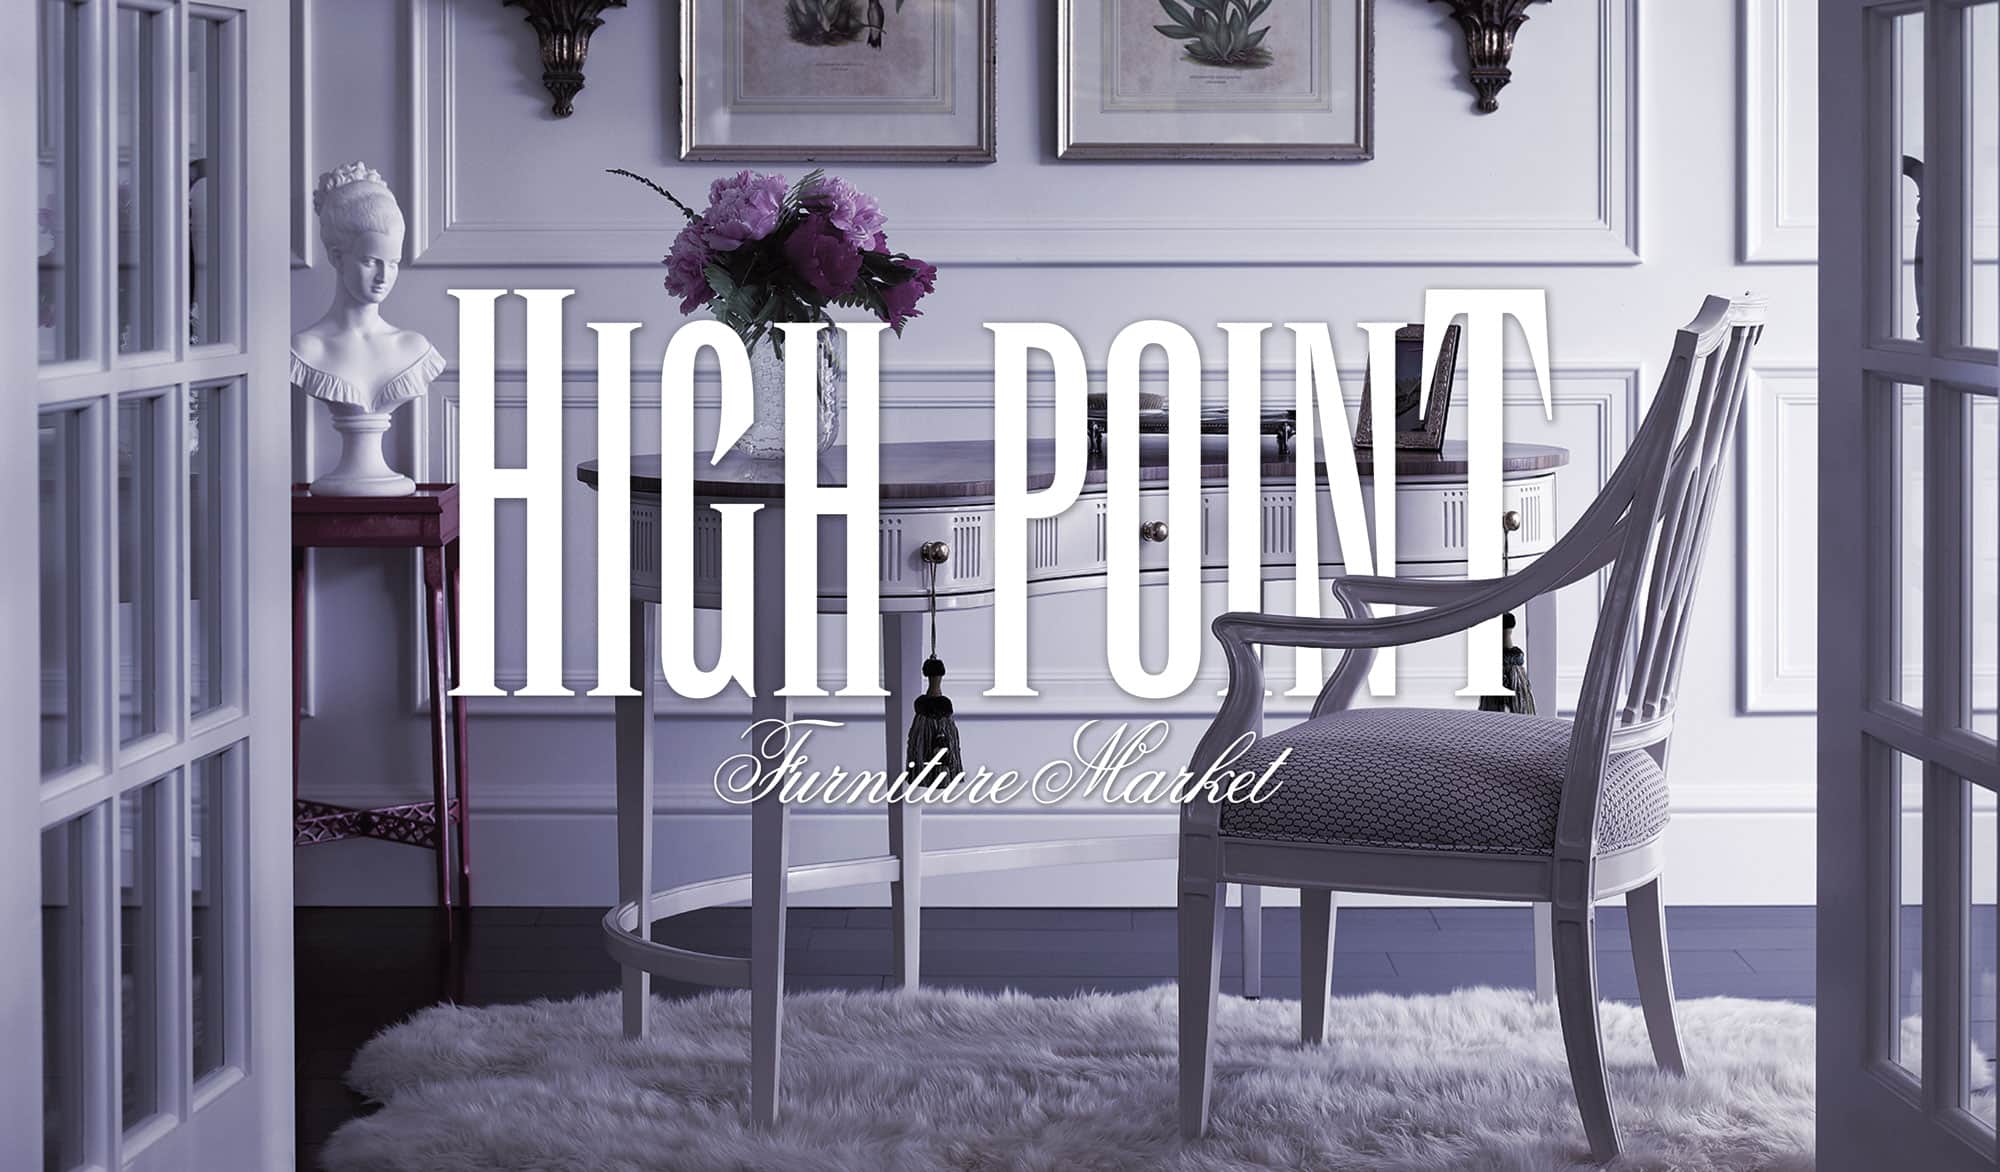 20-facts-about-high-point-furniture-market